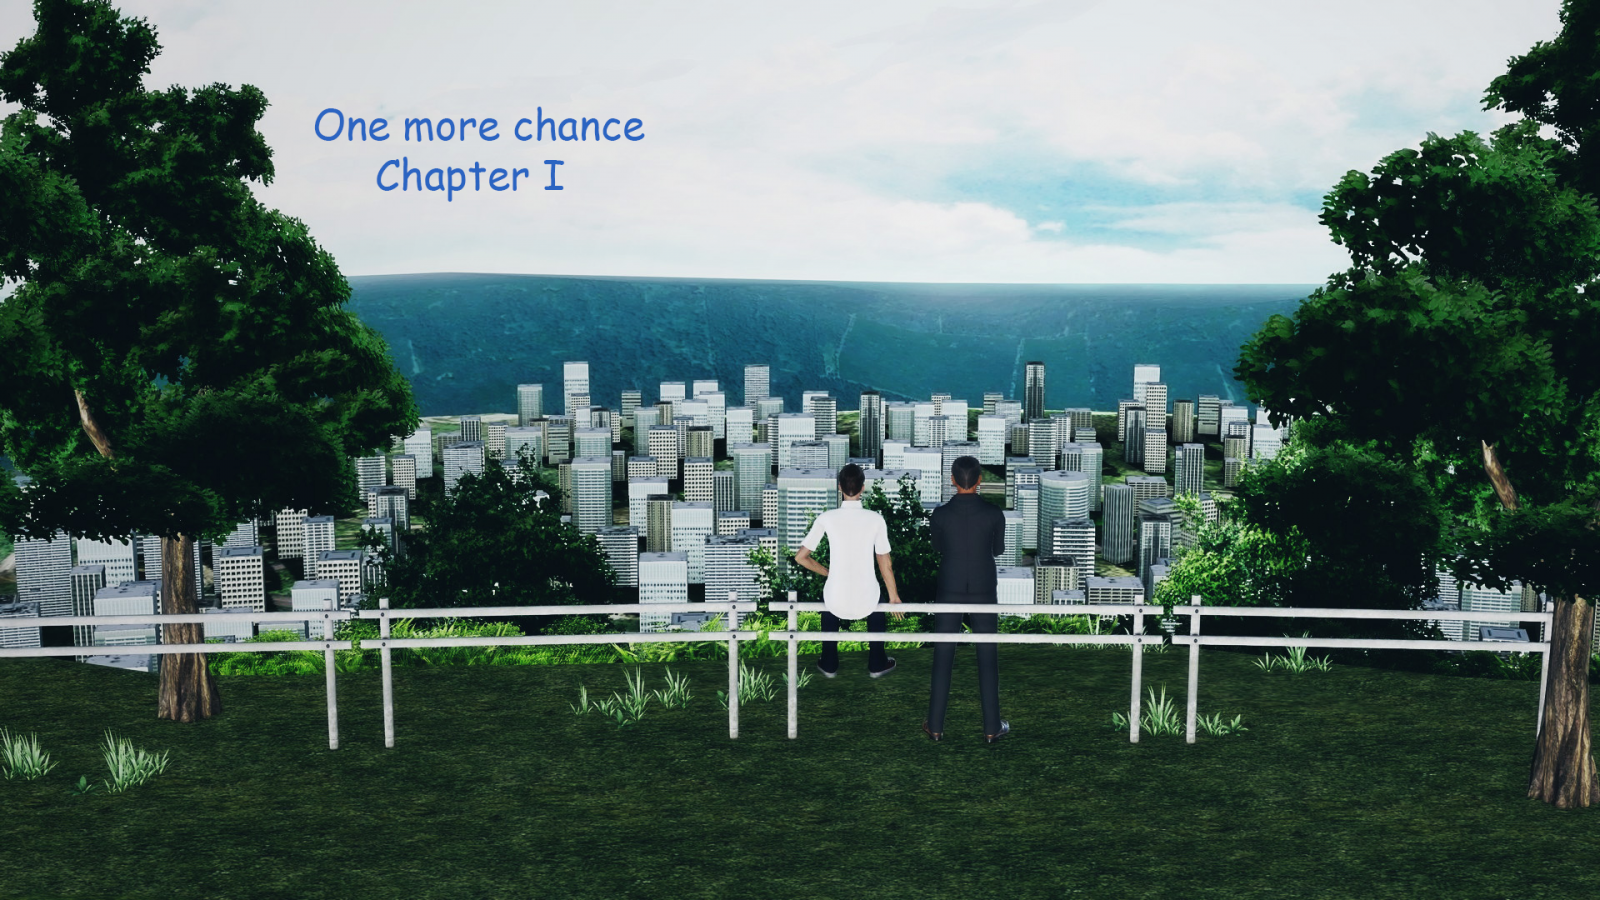 ONE MORE CHANCE CHAPTER I VERSION 0.1 BY THE LONELY JOKER